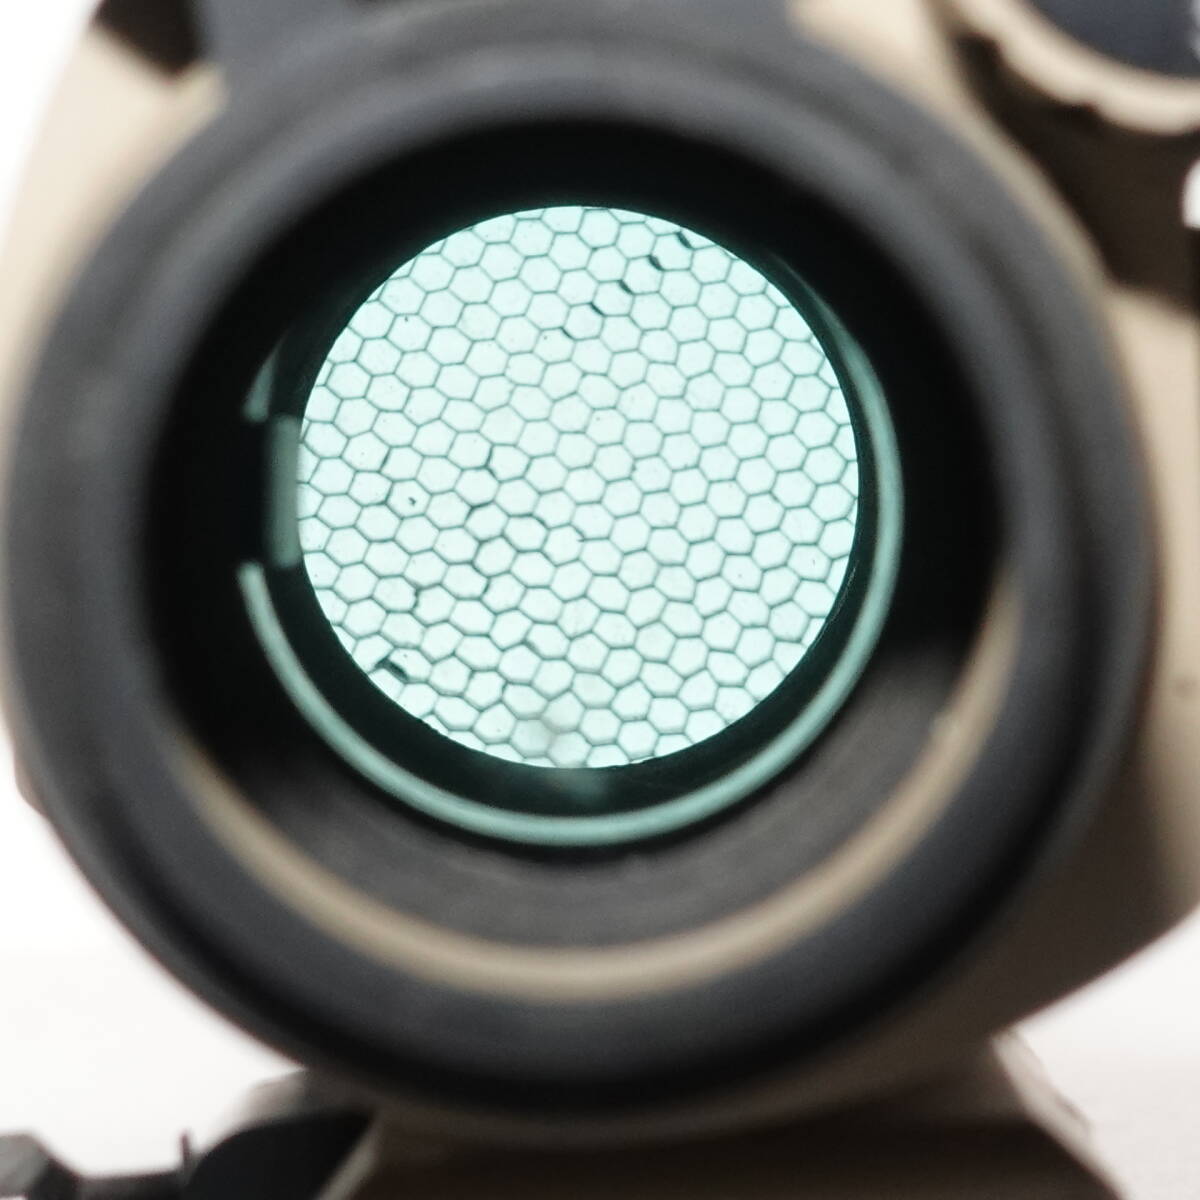  Manufacturers unknown dot site FDE Comp M2 type lighting verification settled 